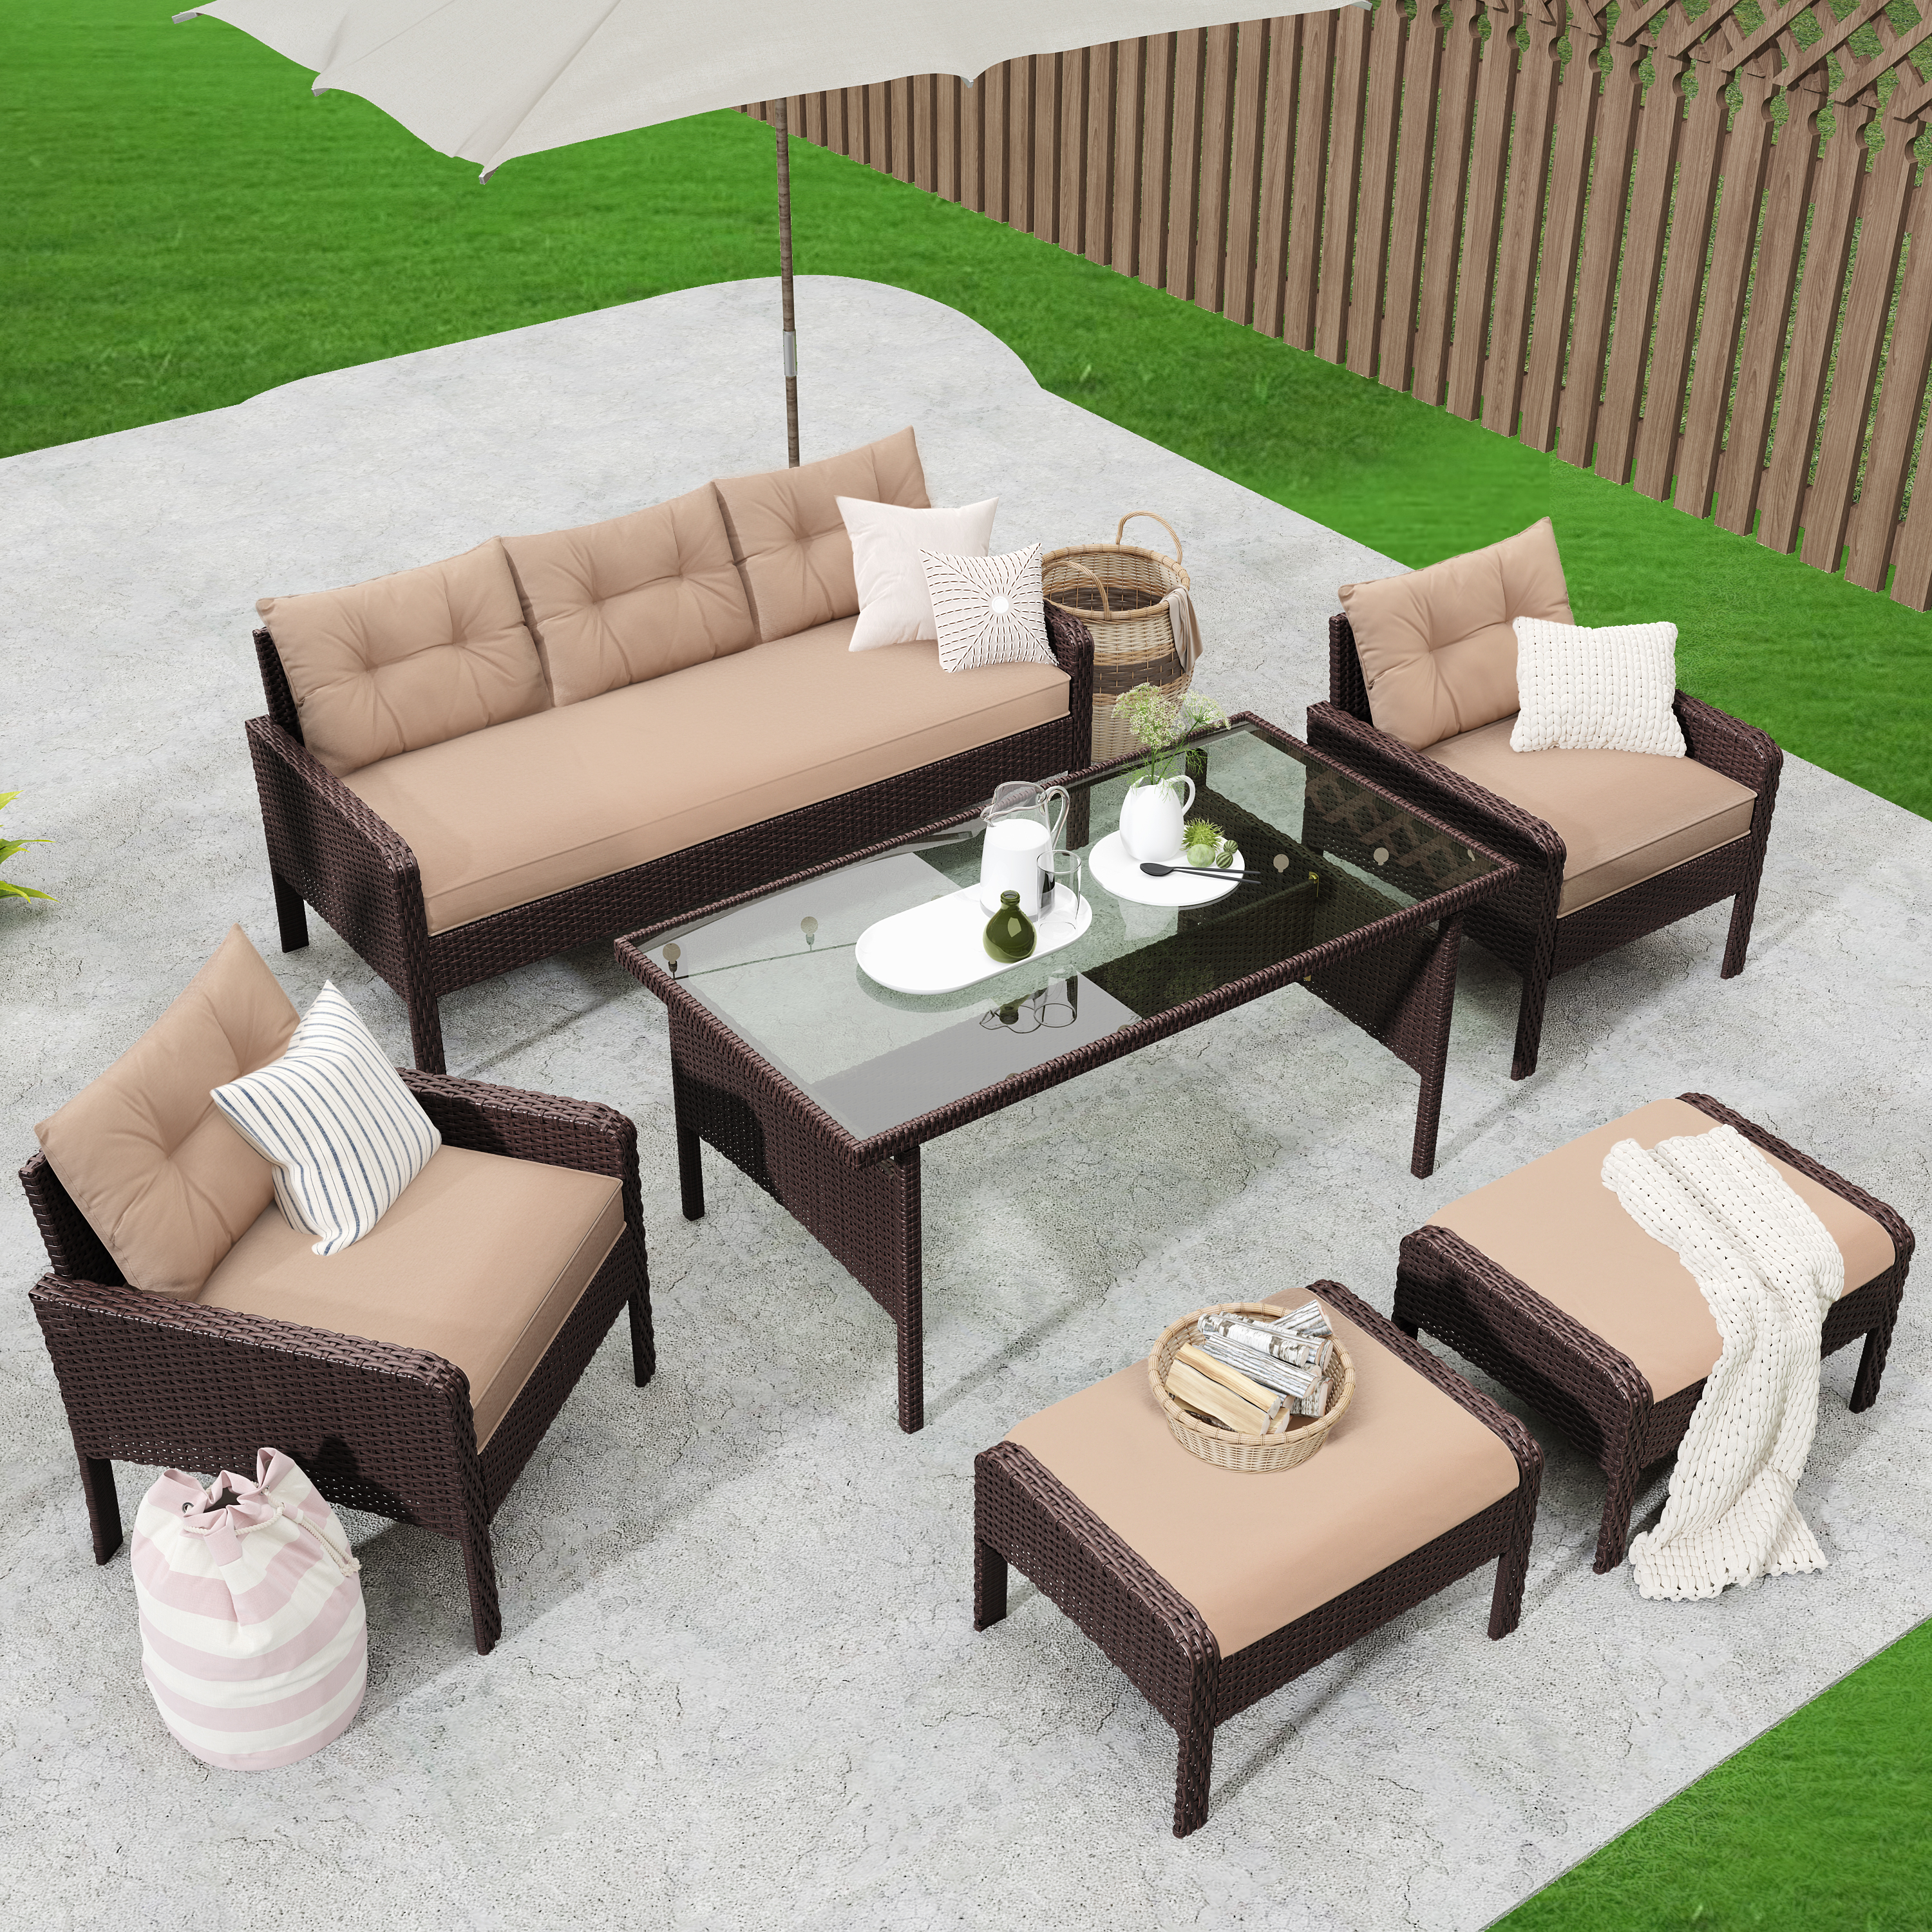 6-Piece Outdoor Patio PE Wicker Rattan Sofa Set Dining Table Set with Removable Cushions and Tempered Glass Tea Table for Backyard, Poolside, Deck, Brown Wicker+Light Coffee Cushion-CASAINC